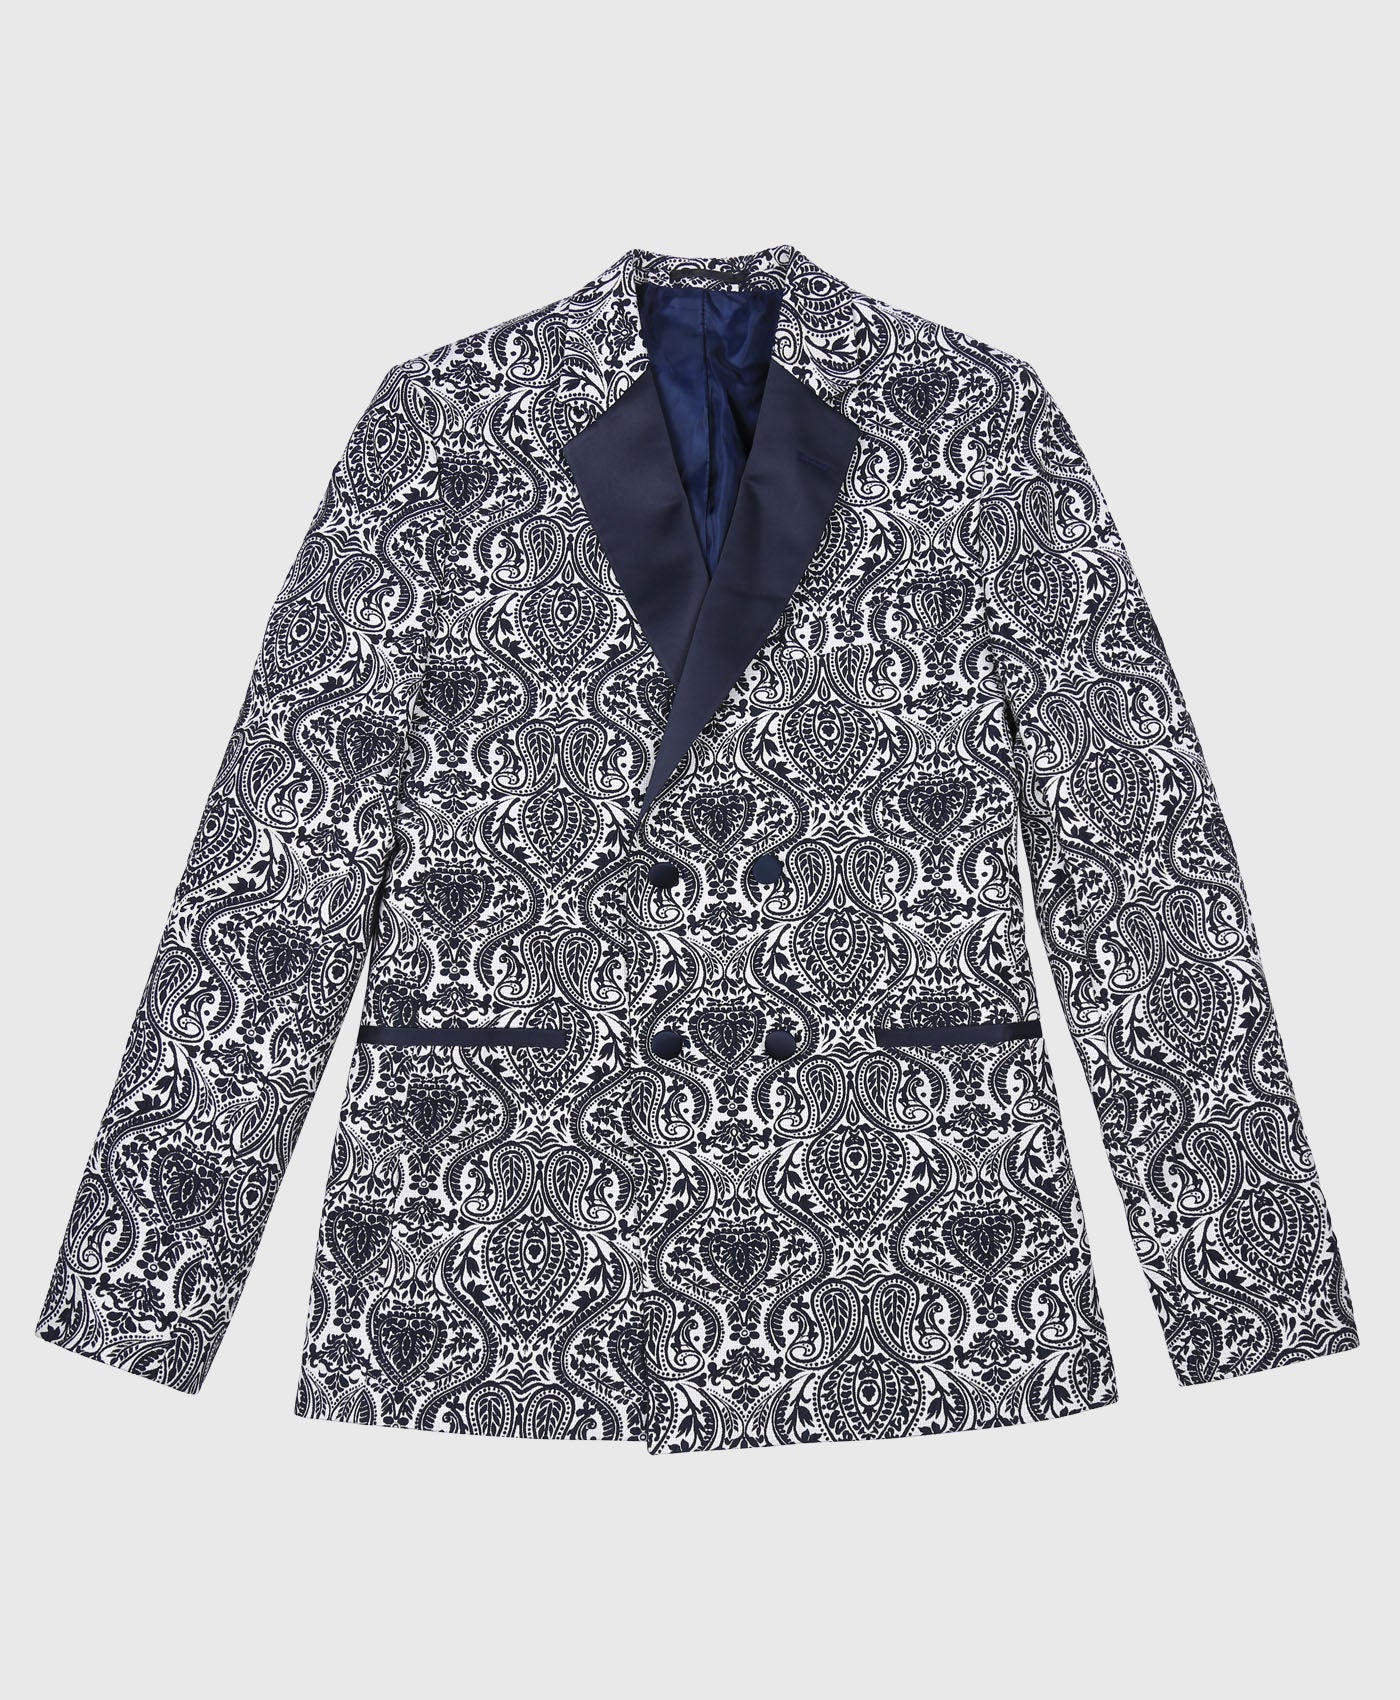 Paisley Print Black Lapel Suit Jacket In Navy And Cream